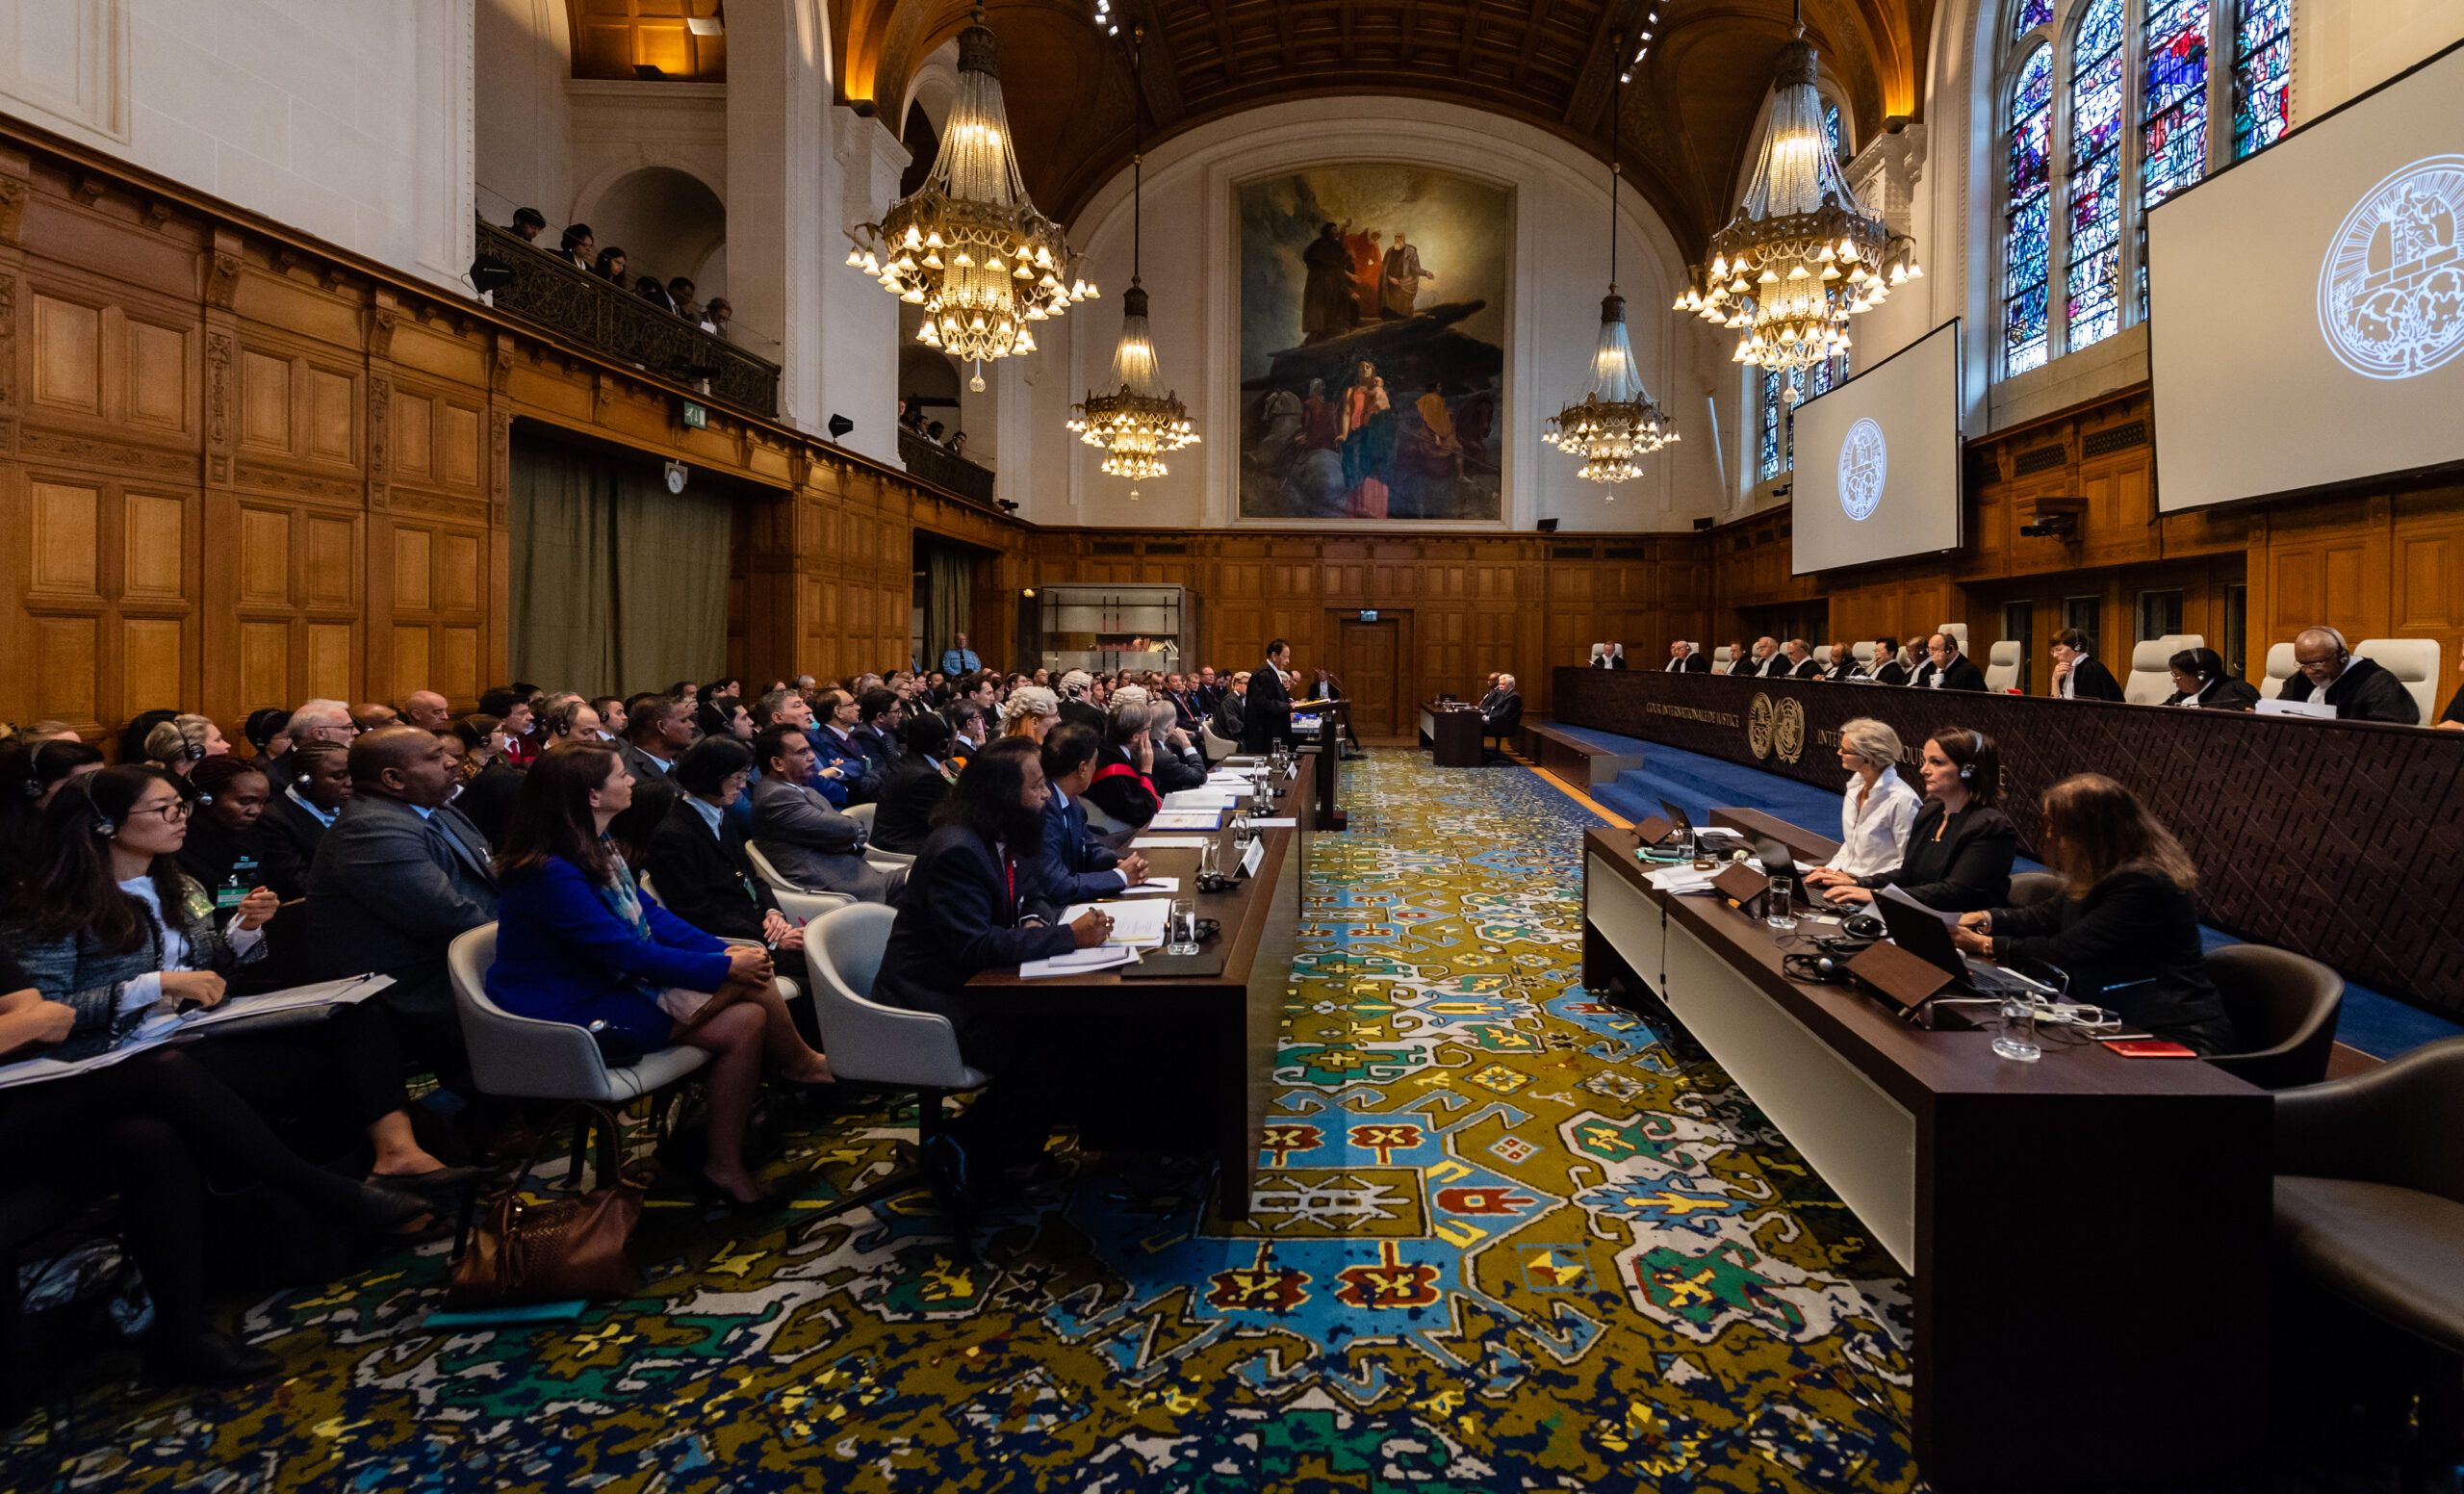 The International Court of Justice (ICJ), principal judicial organ of the UN, holds public hearings in the advisory proceedings in respect of the Legal consequences of the separation of the Chagos Archipelago from Mauritius in 1965 from 3 to 6 September 2018 at the Peace Palace in The Hague, the seat of the Court. Session held under the presidency of Judge Abdulqawi Ahmed Yusuf, President of the Court. The CourtÕs role is to settle, in accordance with international law, legal disputes submitted to it by States (its Judgments are final and binding) and to give advisory opinions on legal questions referred to it by authorized UN organs and agencies. Its official languages are English and French. For more information: www.icj-cij.org

La Cour internationale de Justice (CIJ), organe judiciaire principal des Nations Unies, tient des audiences publiques dans la procdure consultative relative aux Effets juridiques de la sparation de lÕarchipel des Chagos de Maurice en 1965 du 3 au 6 septembre 2018, au Palais de la Paix,  La Haye, o la Cour a son sige. Sance publique tenue sous la prsidence de M. Abdulqawi Ahmed Yusuf, prsident de la Cour. La mission de la Cour est de rgler, conformment au droit international, les diffrends dÕordre juridique qui lui sont soumis par les Etats (ses arrts sont sans appel et obligatoires pour les Parties) et de donner des avis consultatifs sur les questions juridiques que lui posent les organes et les institutions de lÕONU autoriss  le faire. Pour en savoir plus: www.icj-cij.org